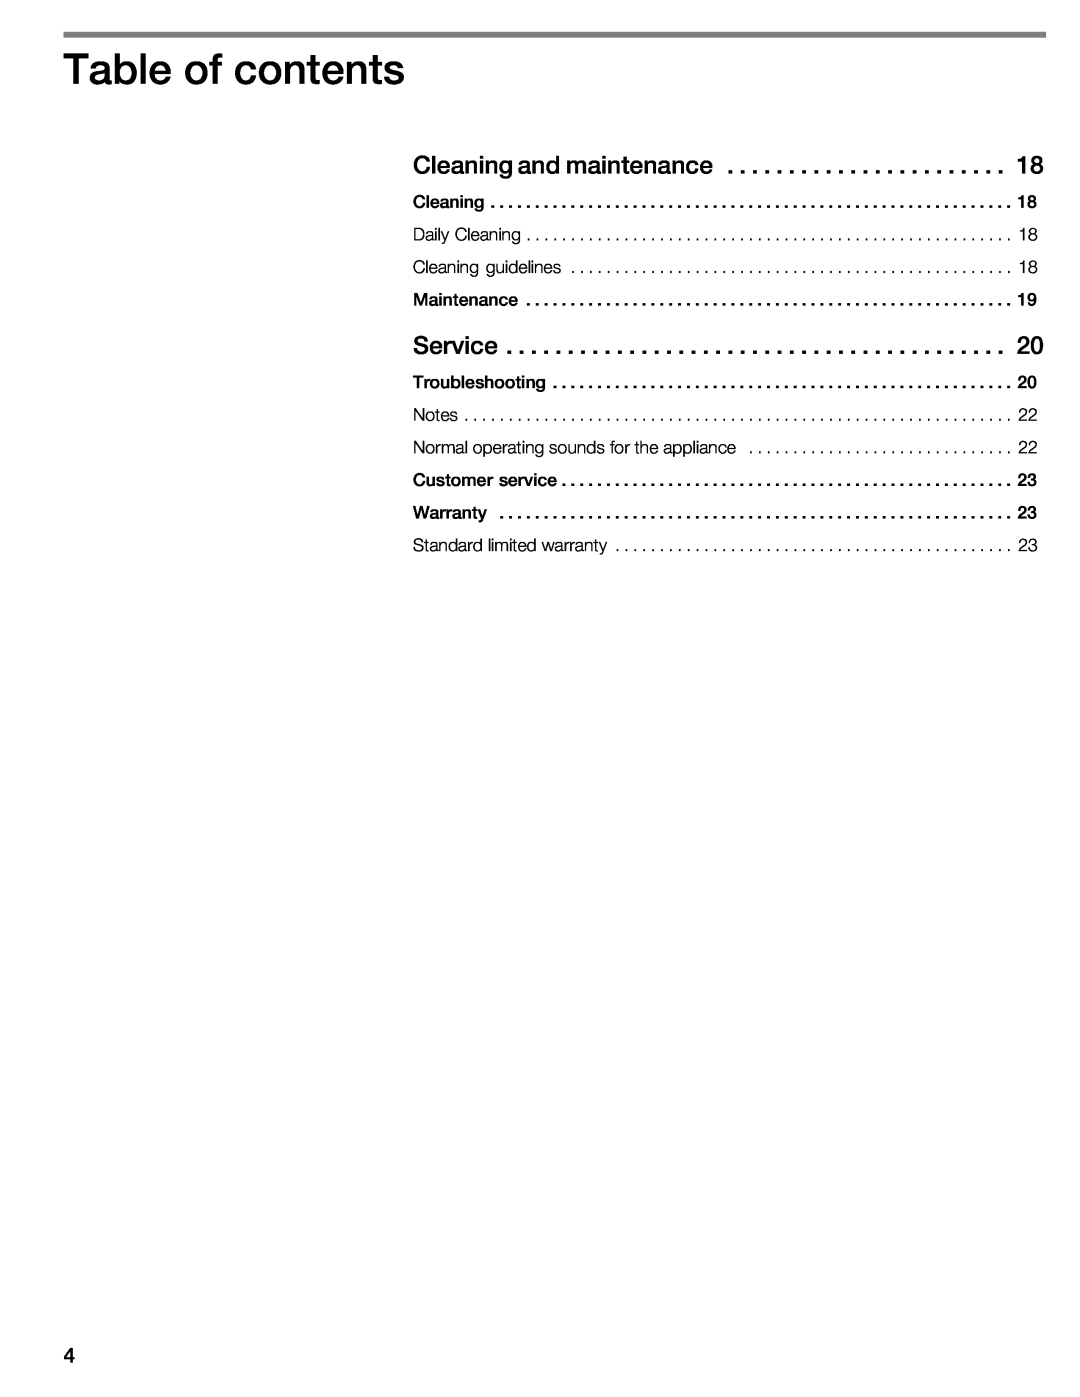 Thermador CIT304E manual Service, Table of contents 